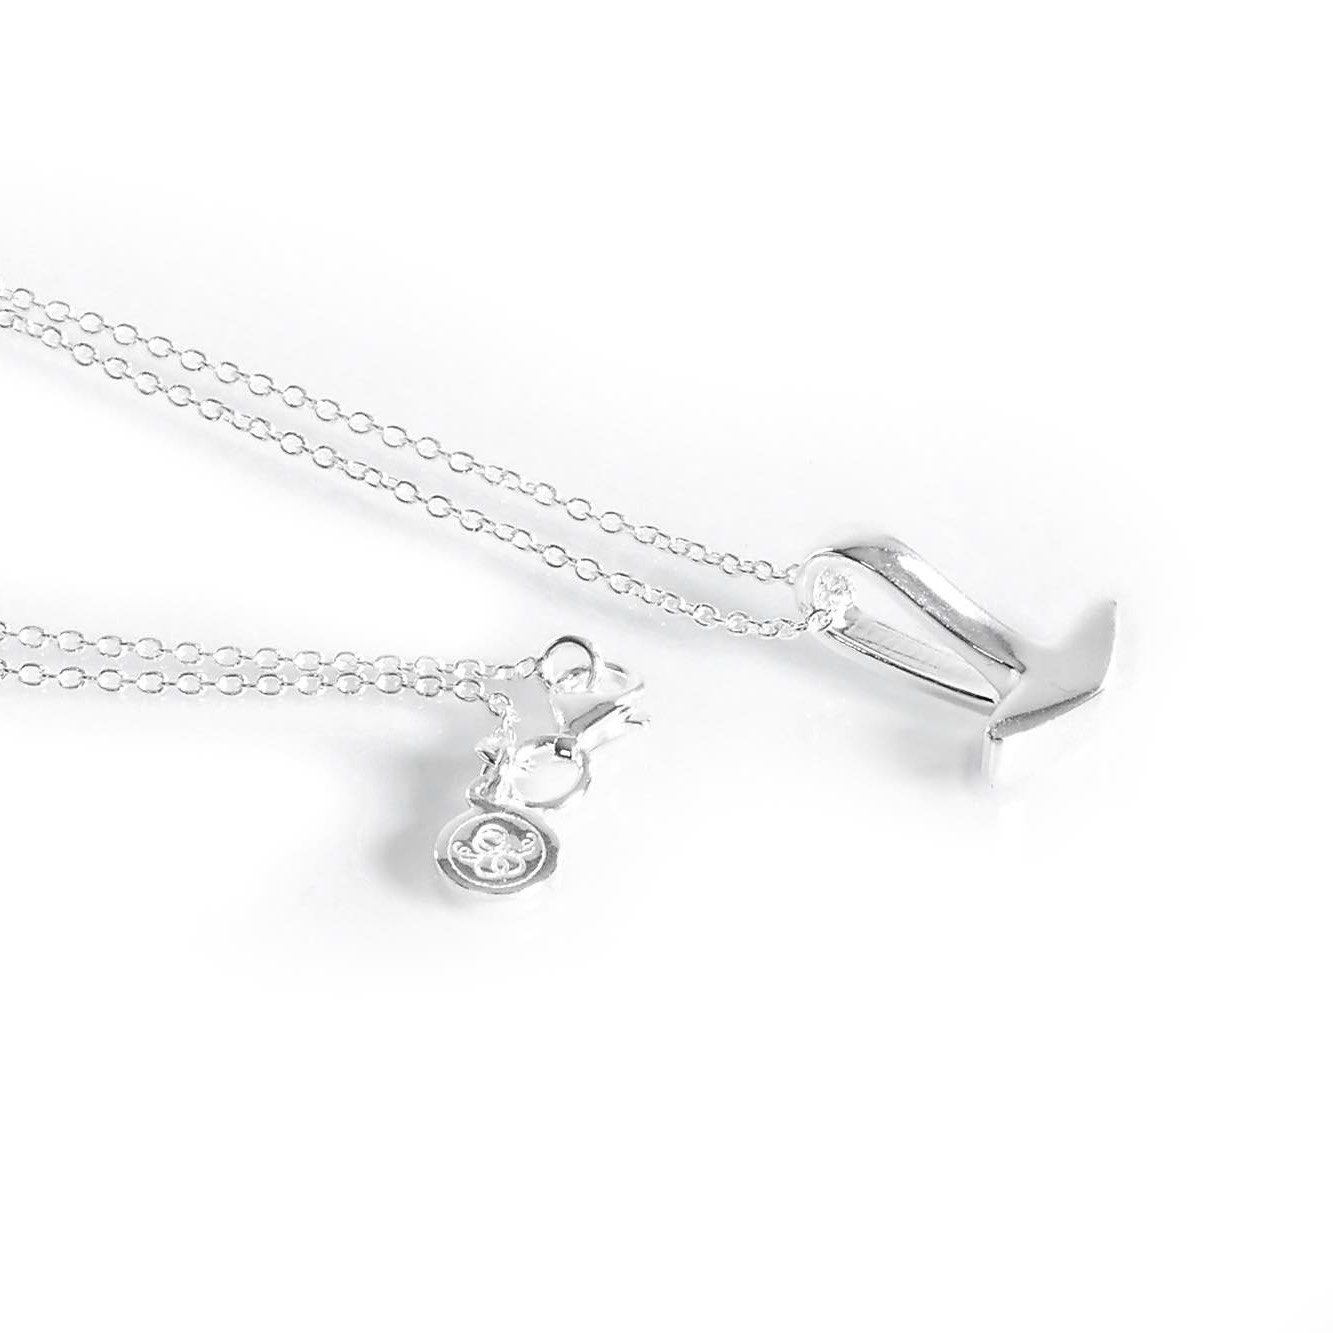 Soldiser Thor's Hammer Silver Necklace